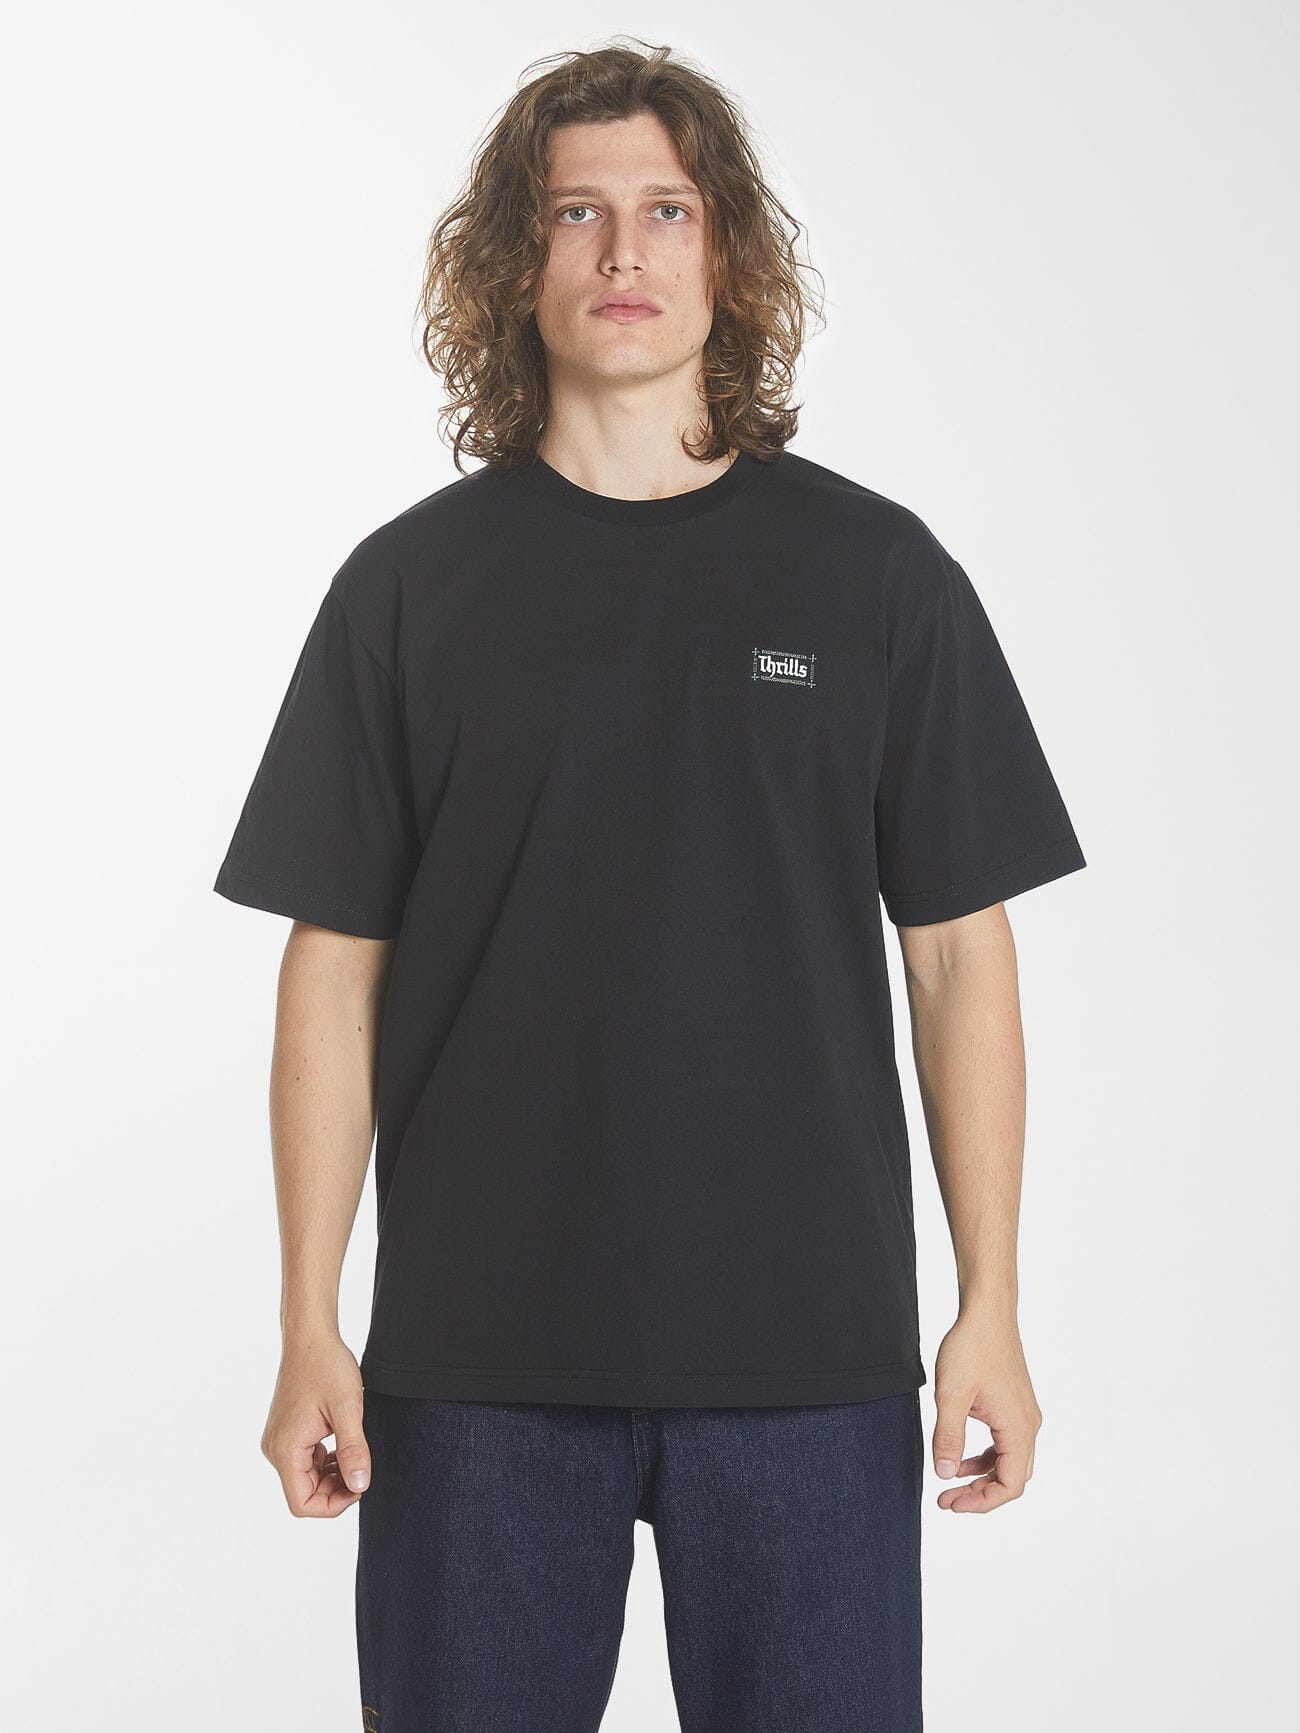 Arch Oversize Fit Tee - Black XS